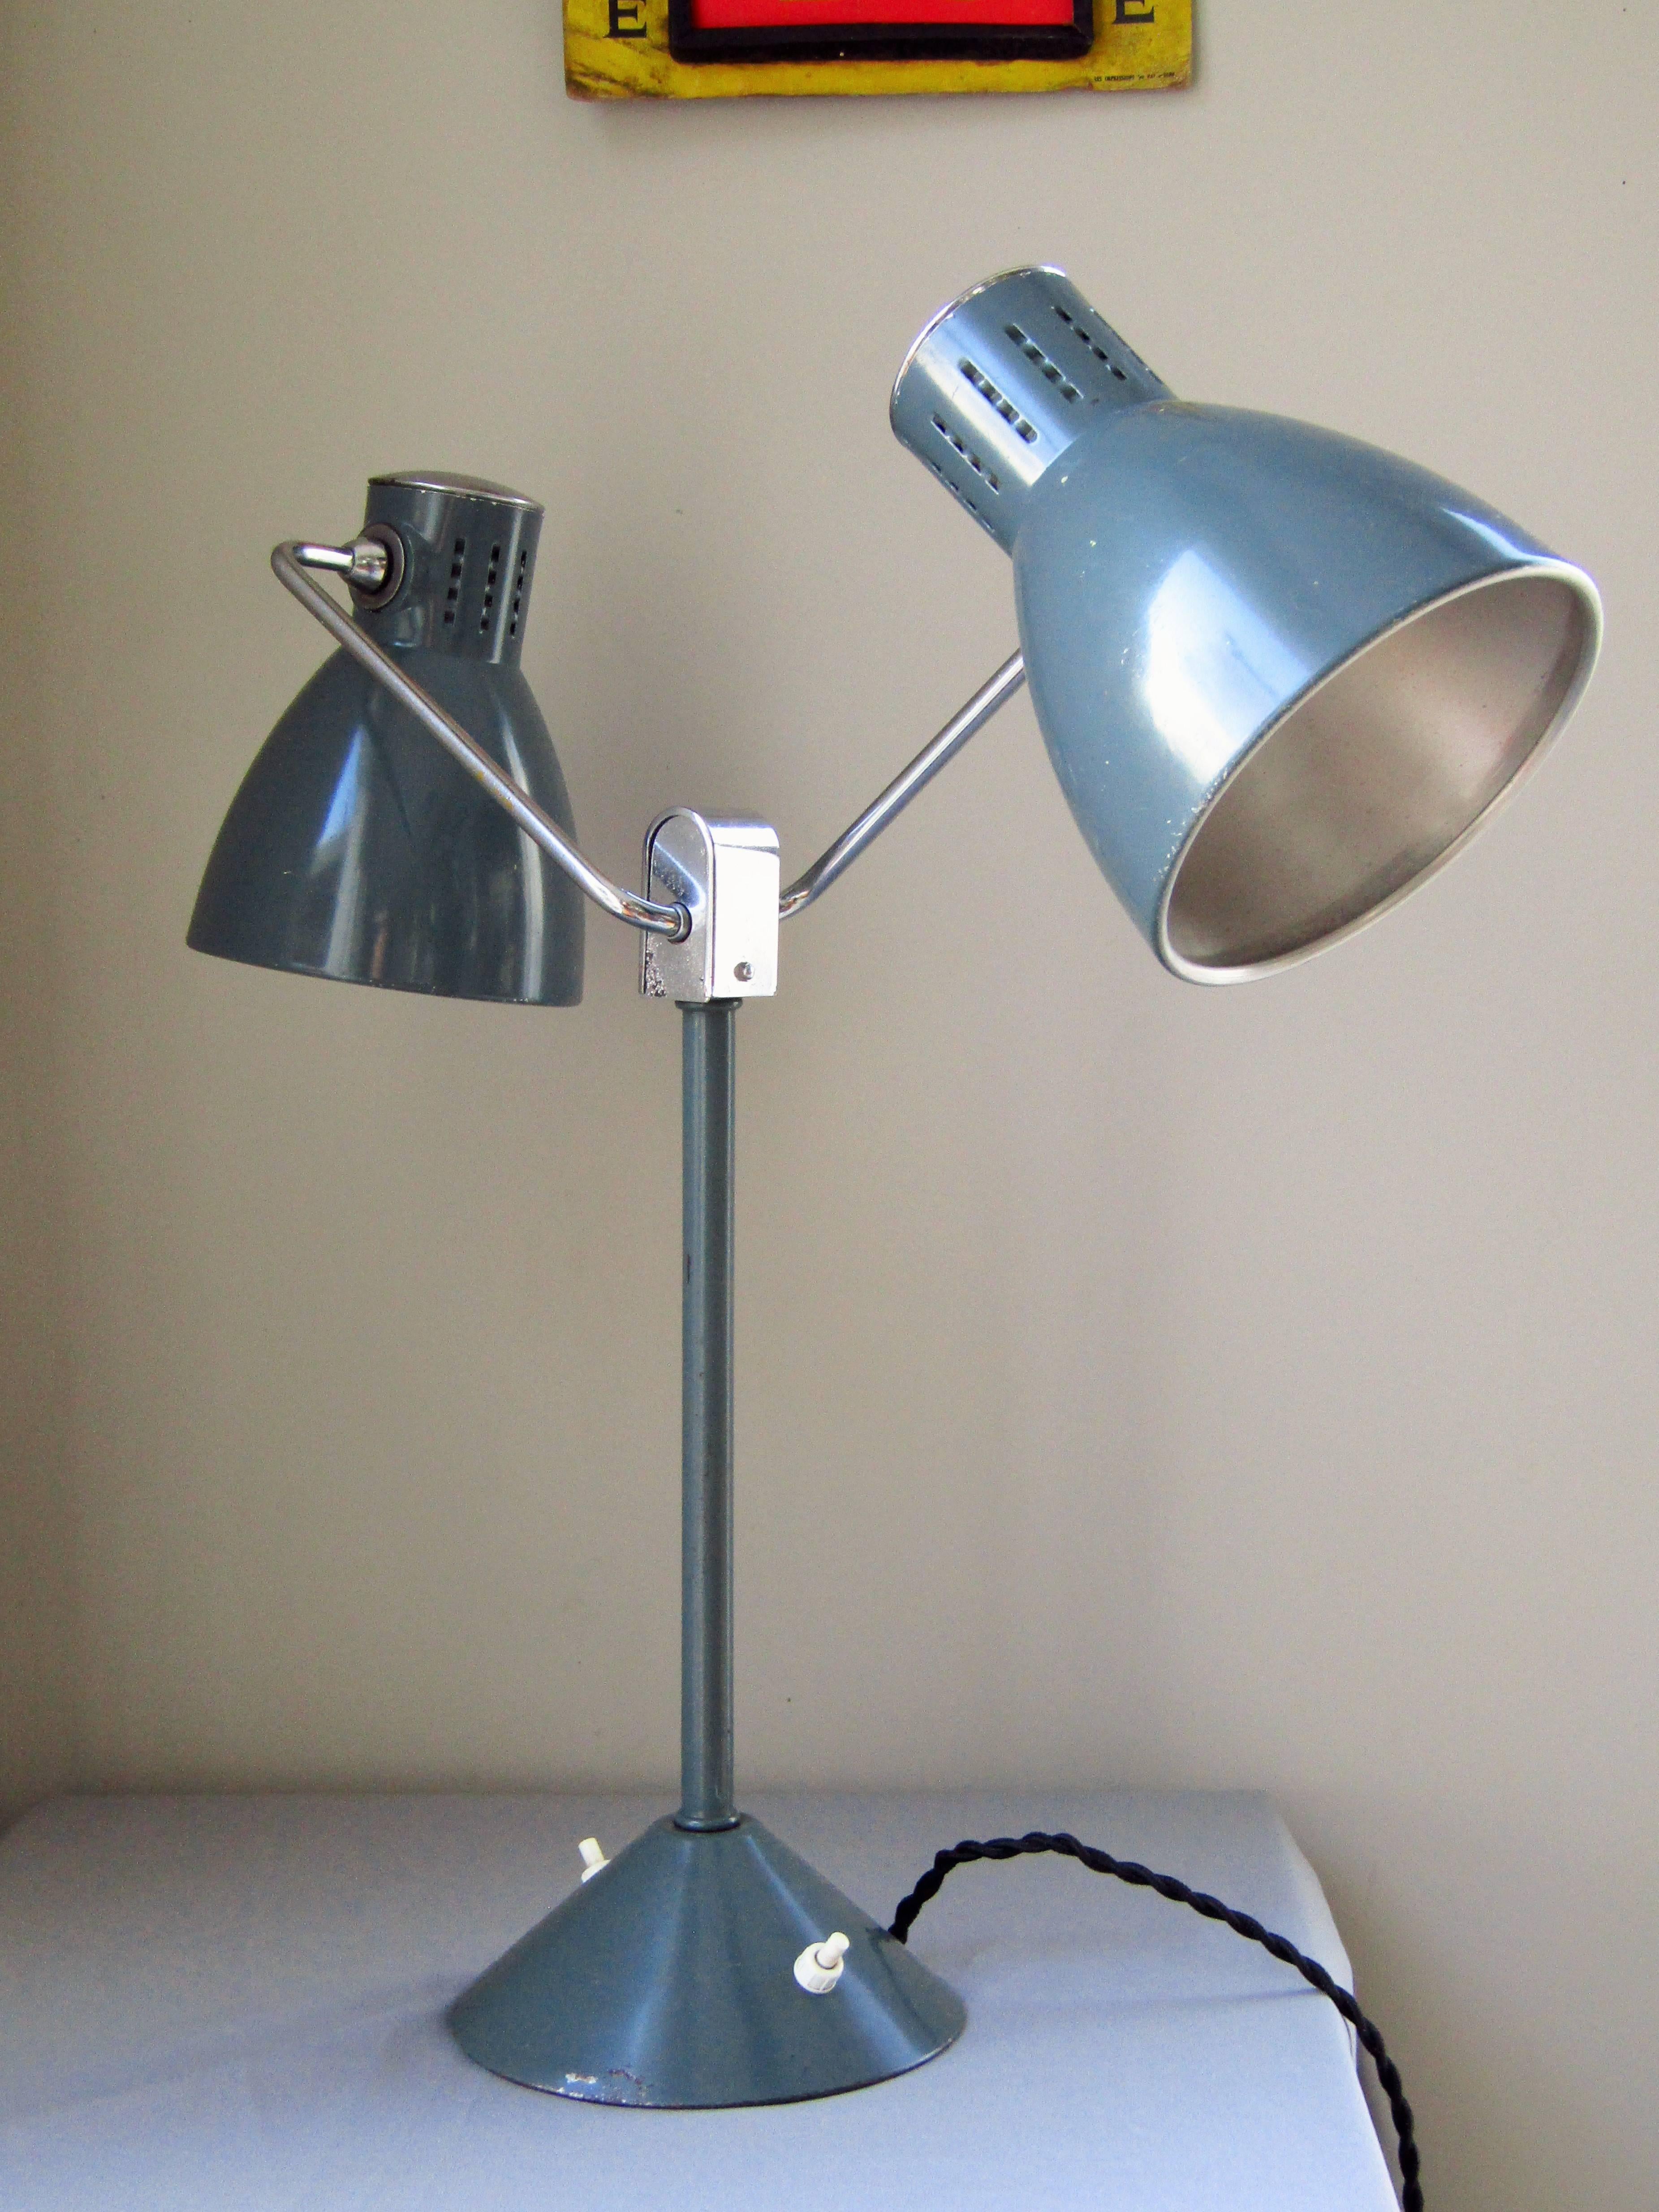 Art Deco double desk lamp by Jumo, France, 1940s. Original condition, only rewired. Gently worn patina.

